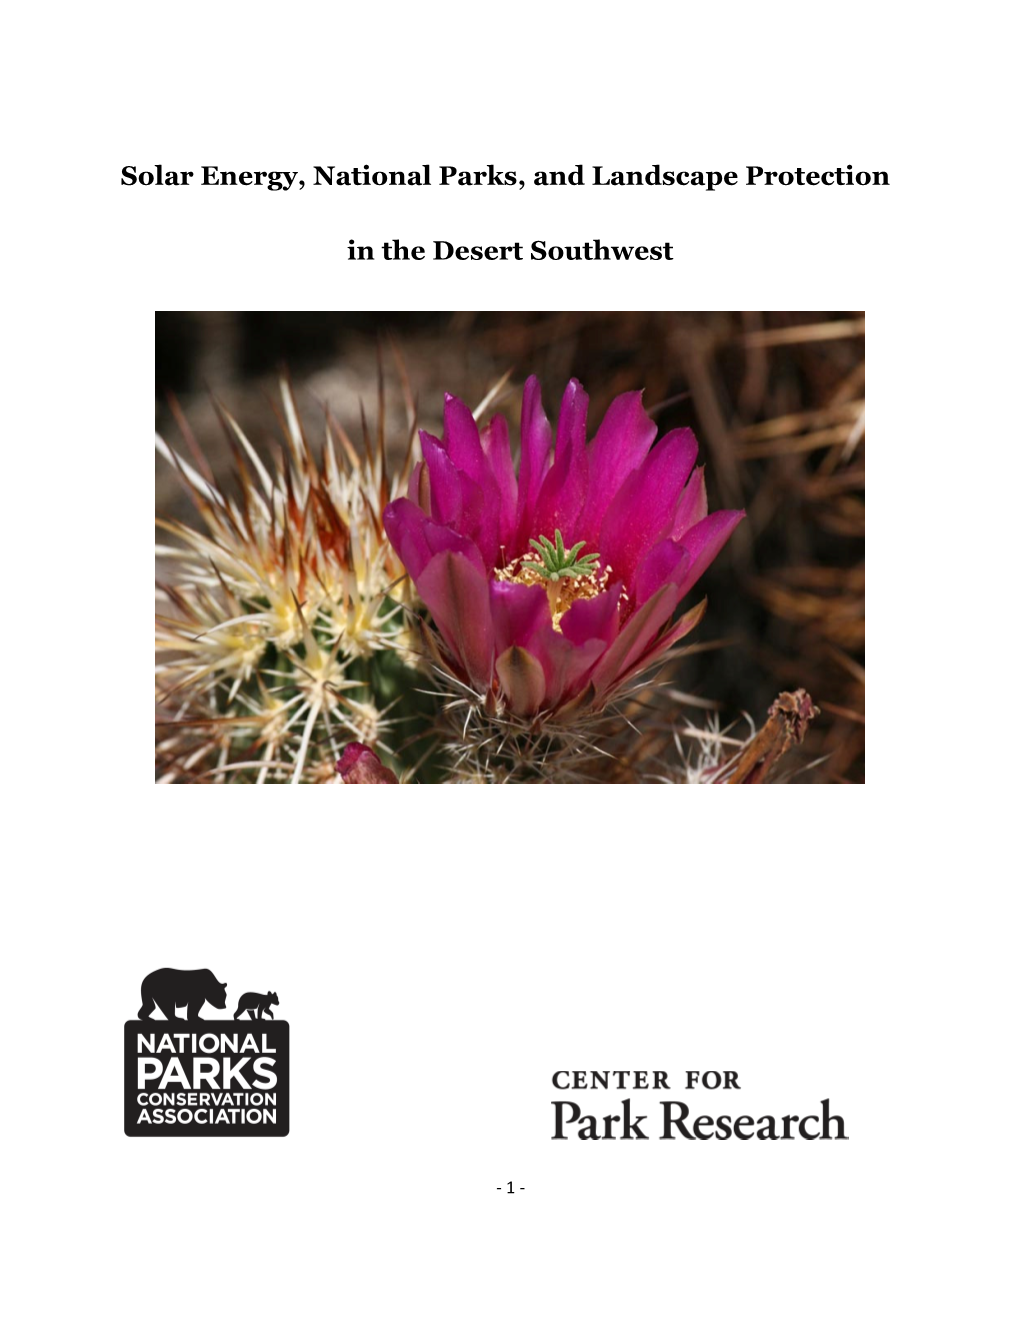 Solar Energy, National Parks, and Landscape Protection in the Desert